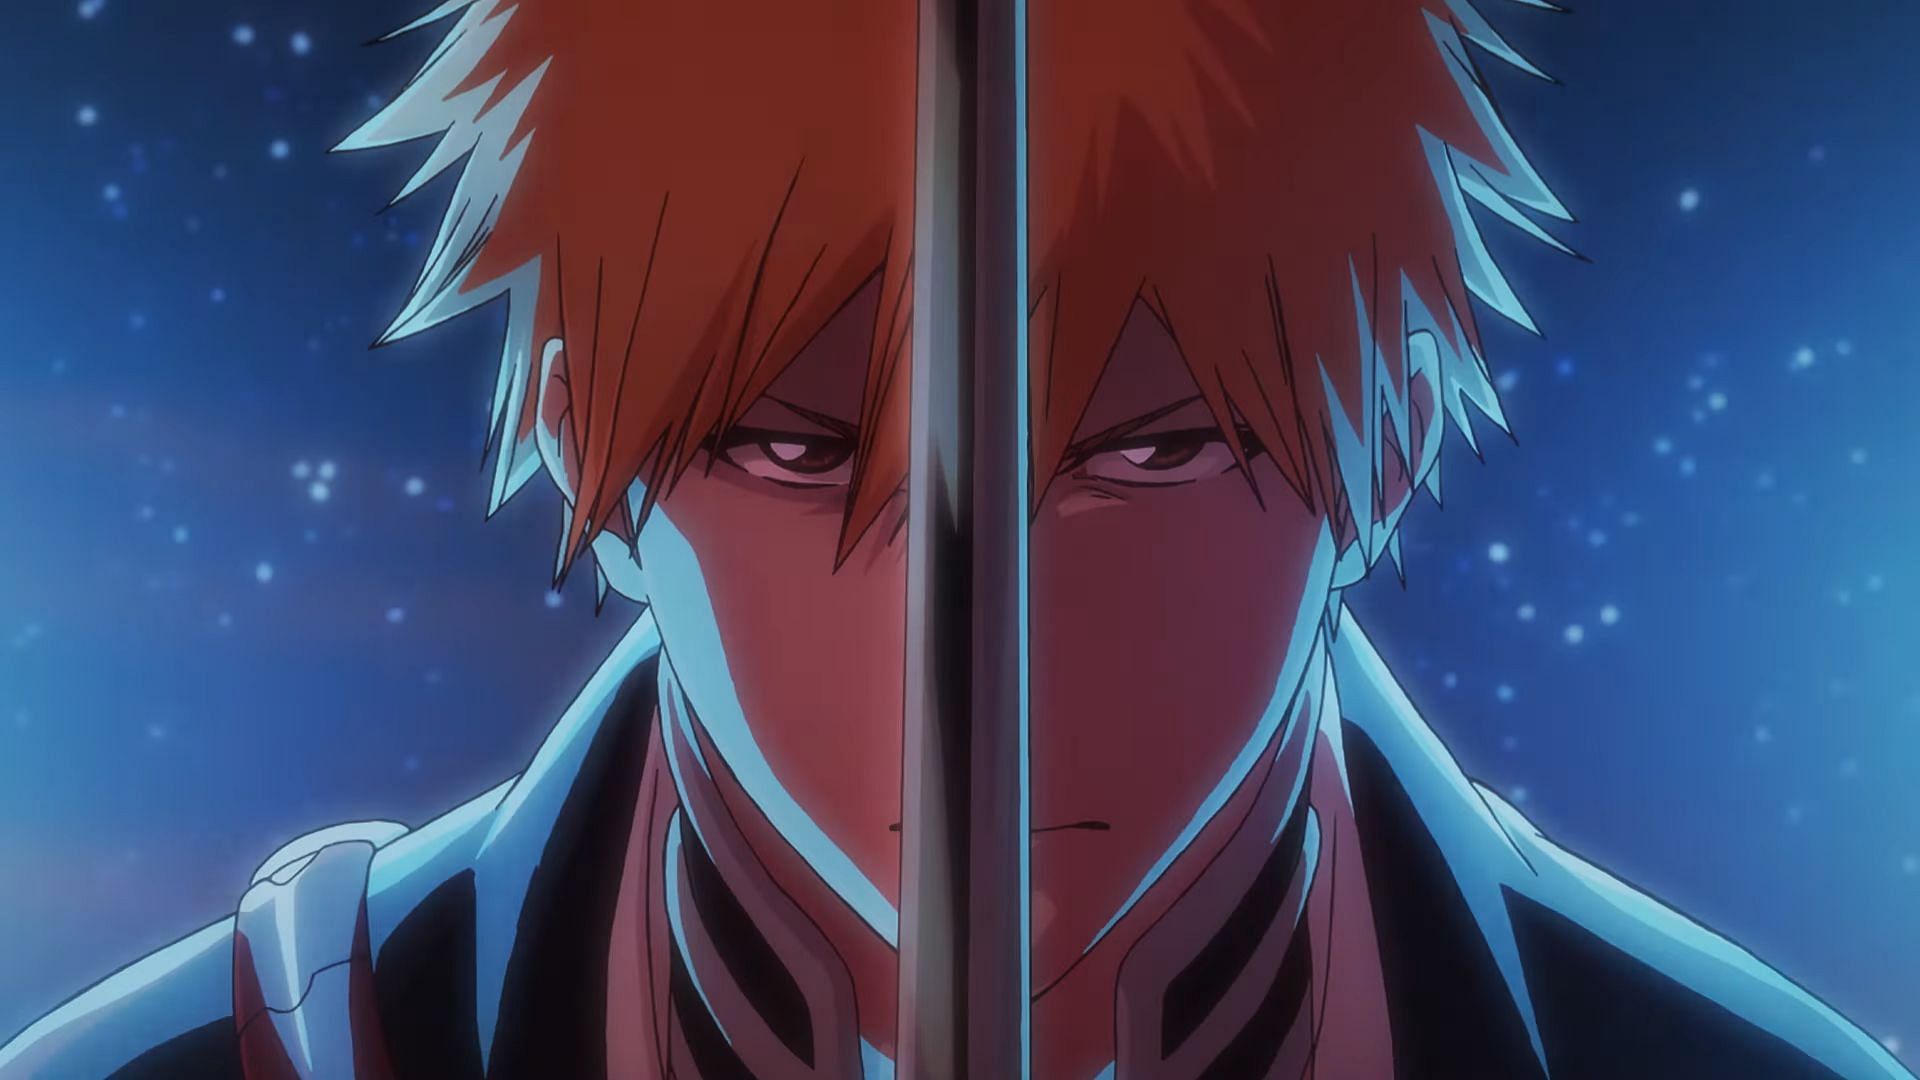 Bleach Thousand Year Blood War returns with what is expected to be an explosive episode 3 (Image via Studio Pierrot)